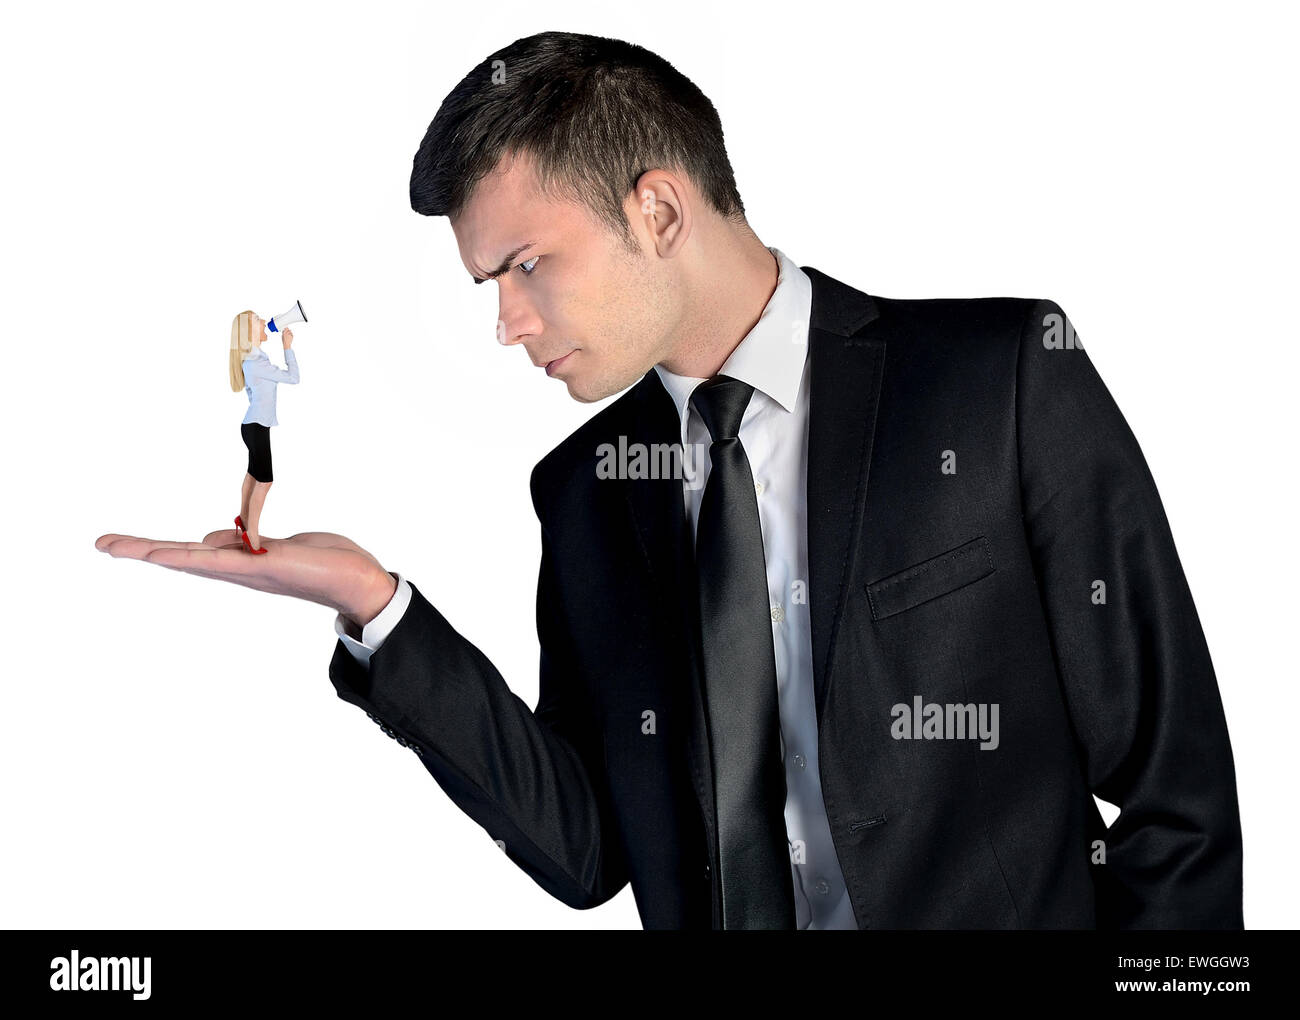 Isolated business man looking angry on little woman Stock Photo